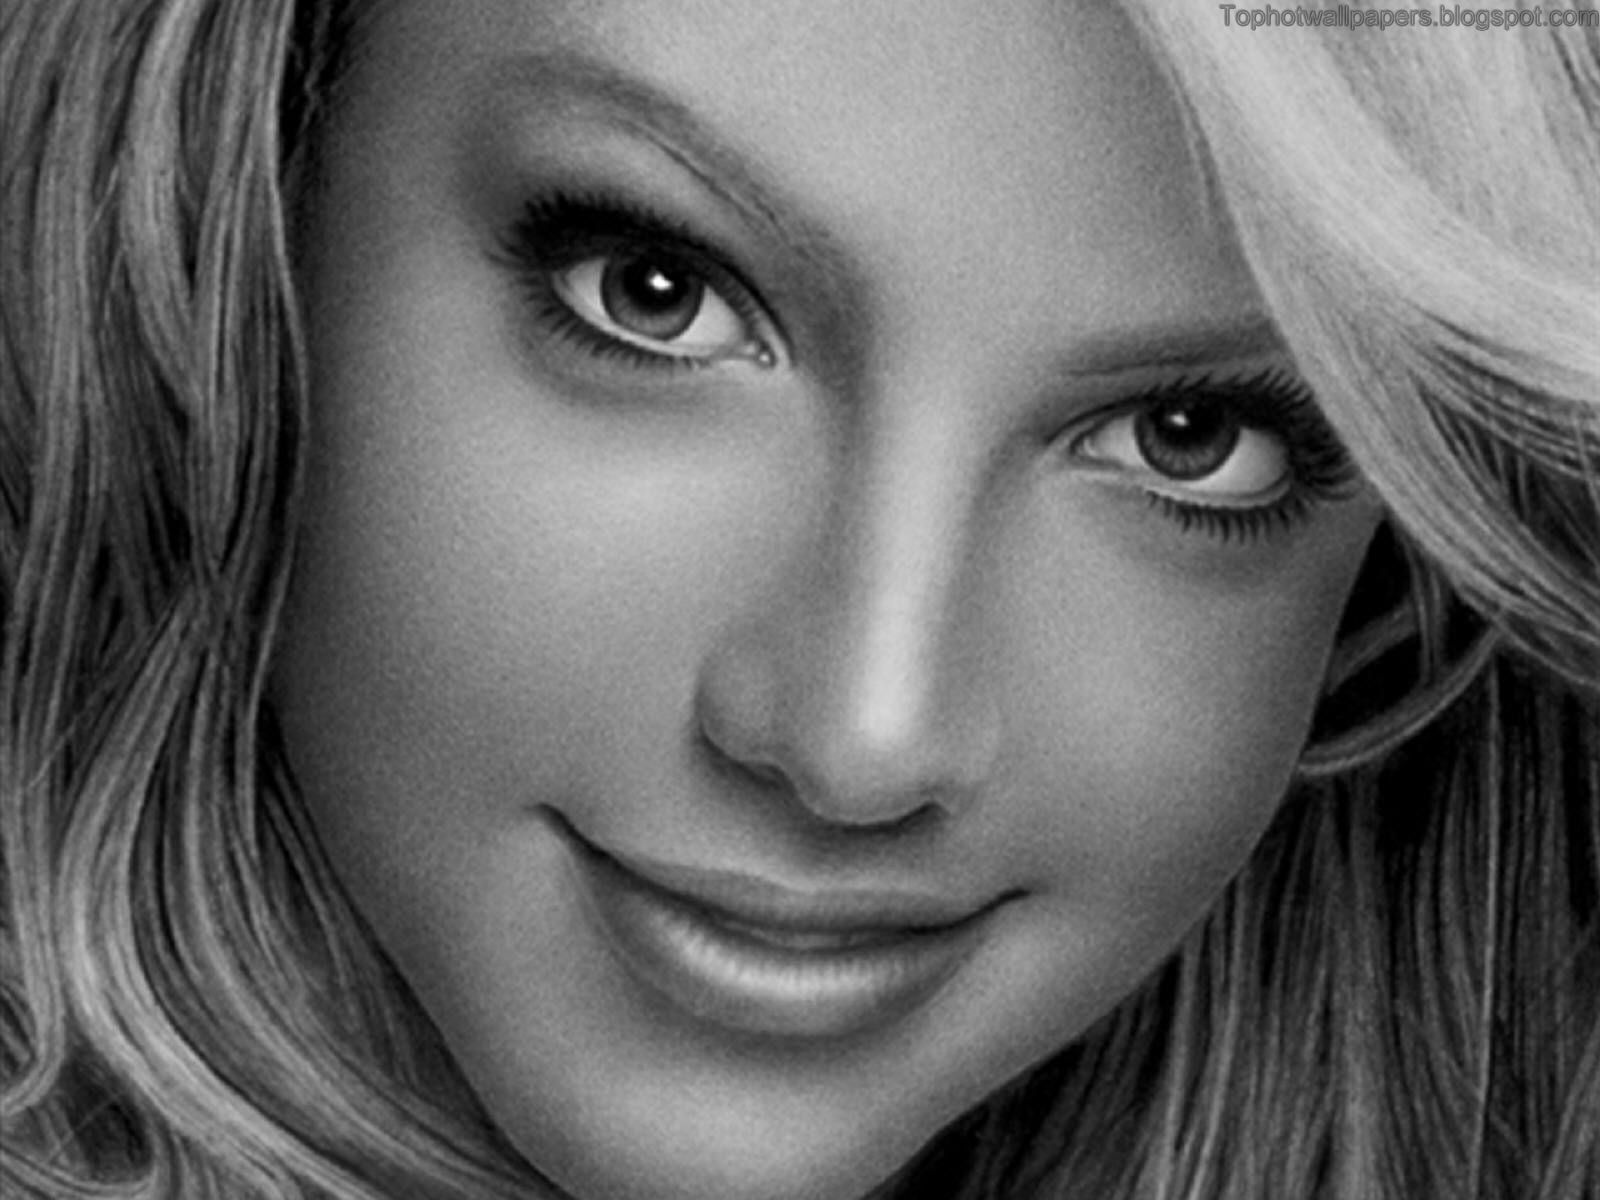 HD Wallpapers: Britney Spears(Black and White Edition)